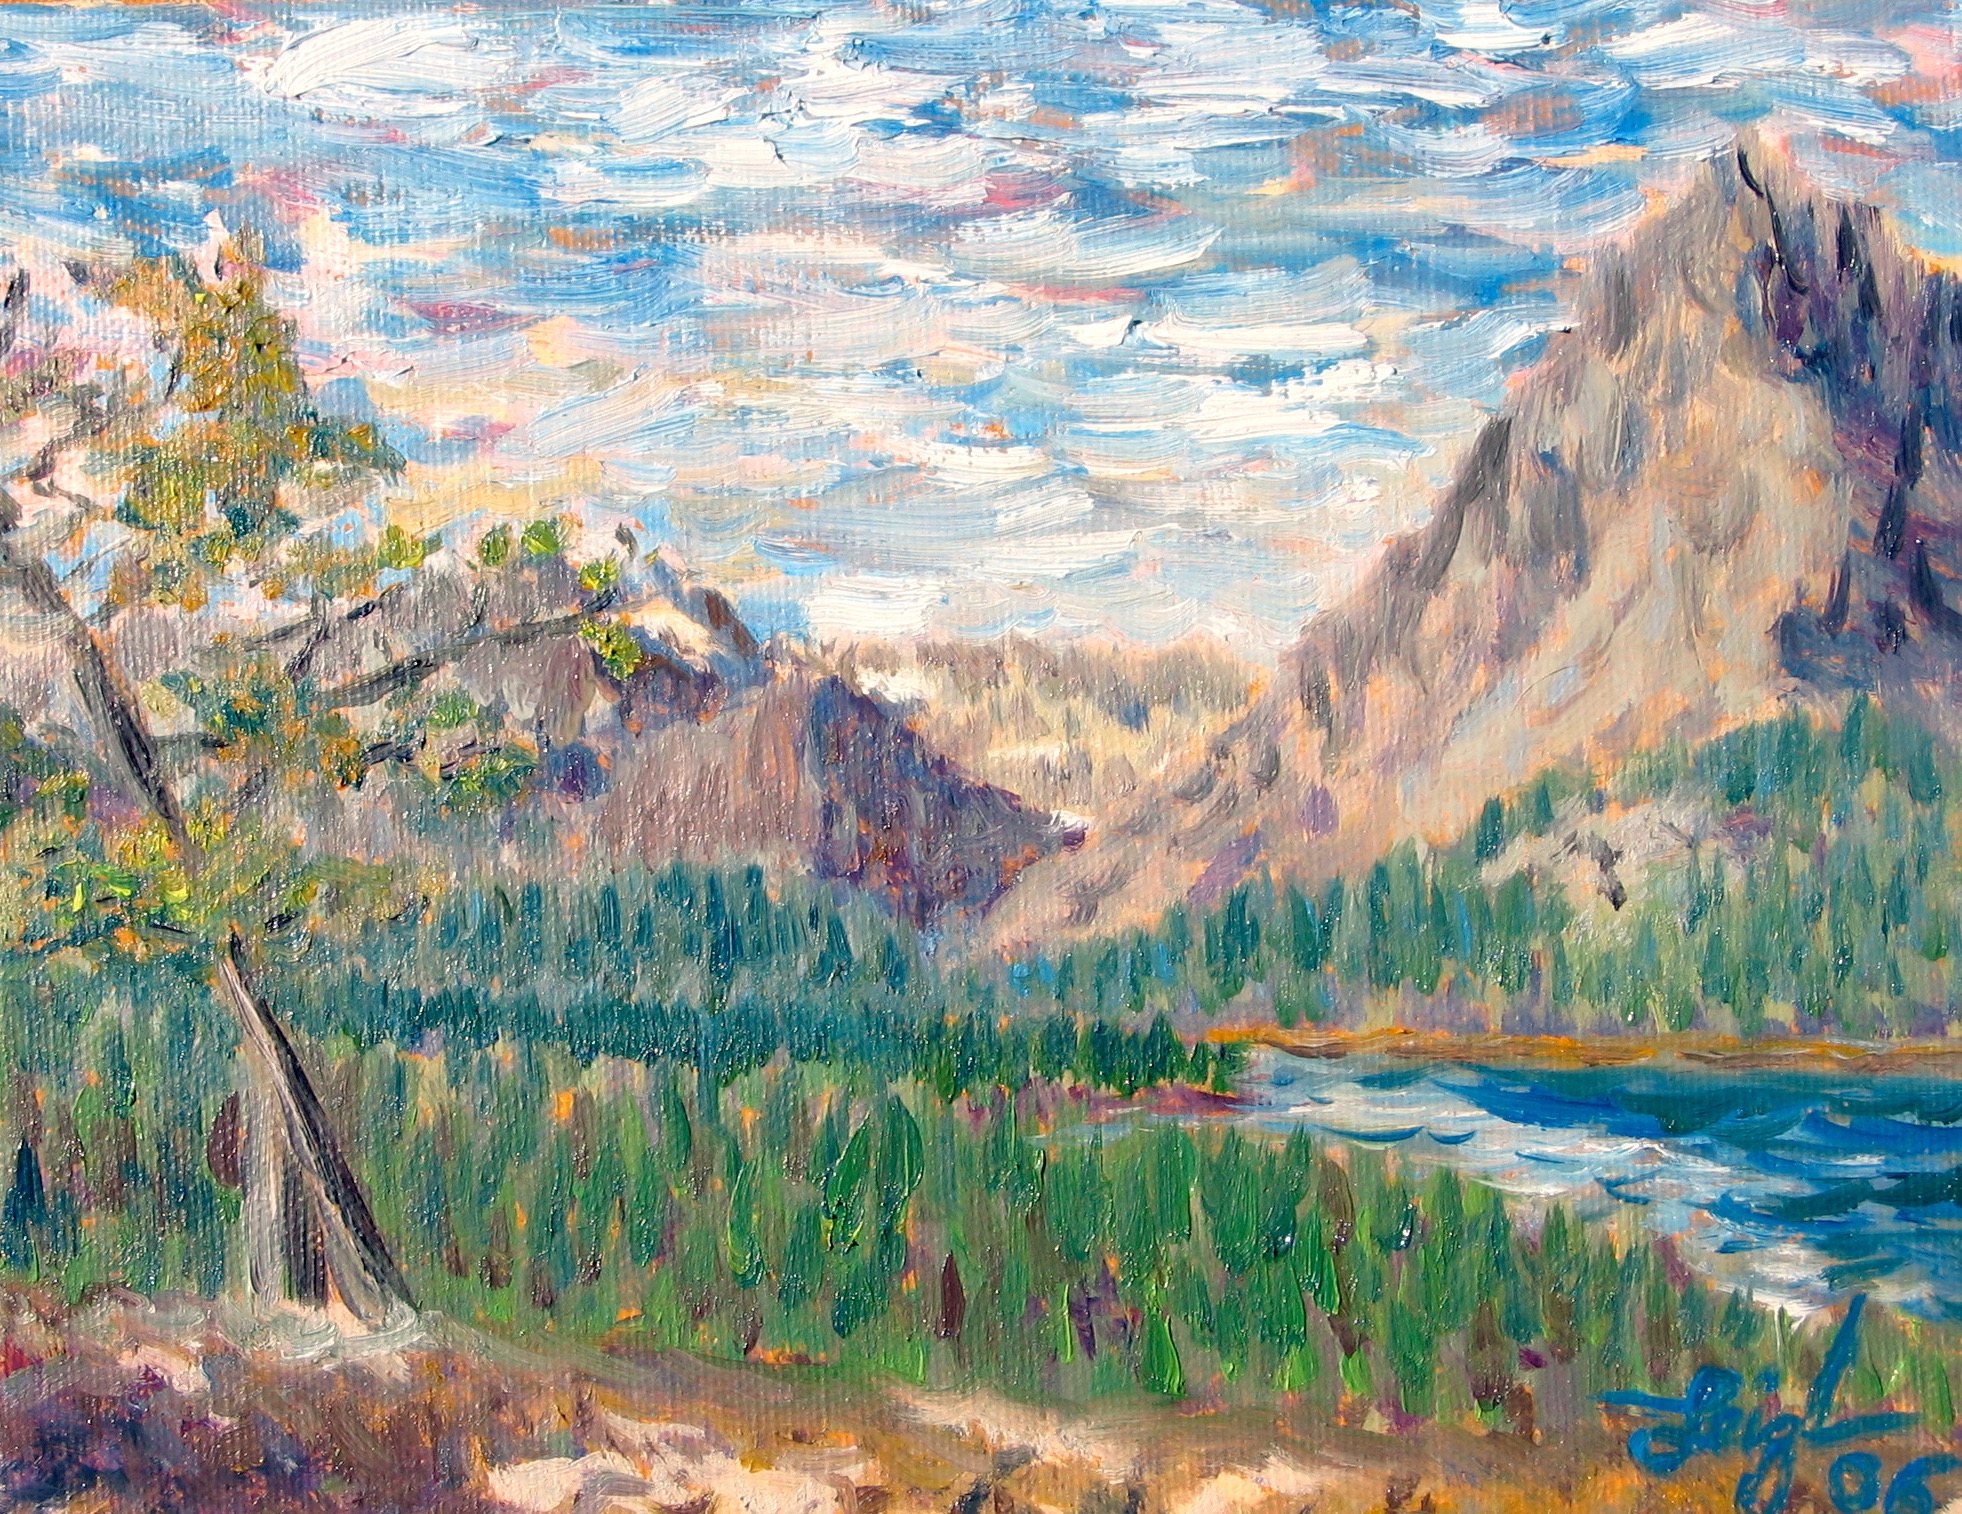 Many Glacier #2  ~  
Private collection, Kalispell, MT
2006  •  11 x 14